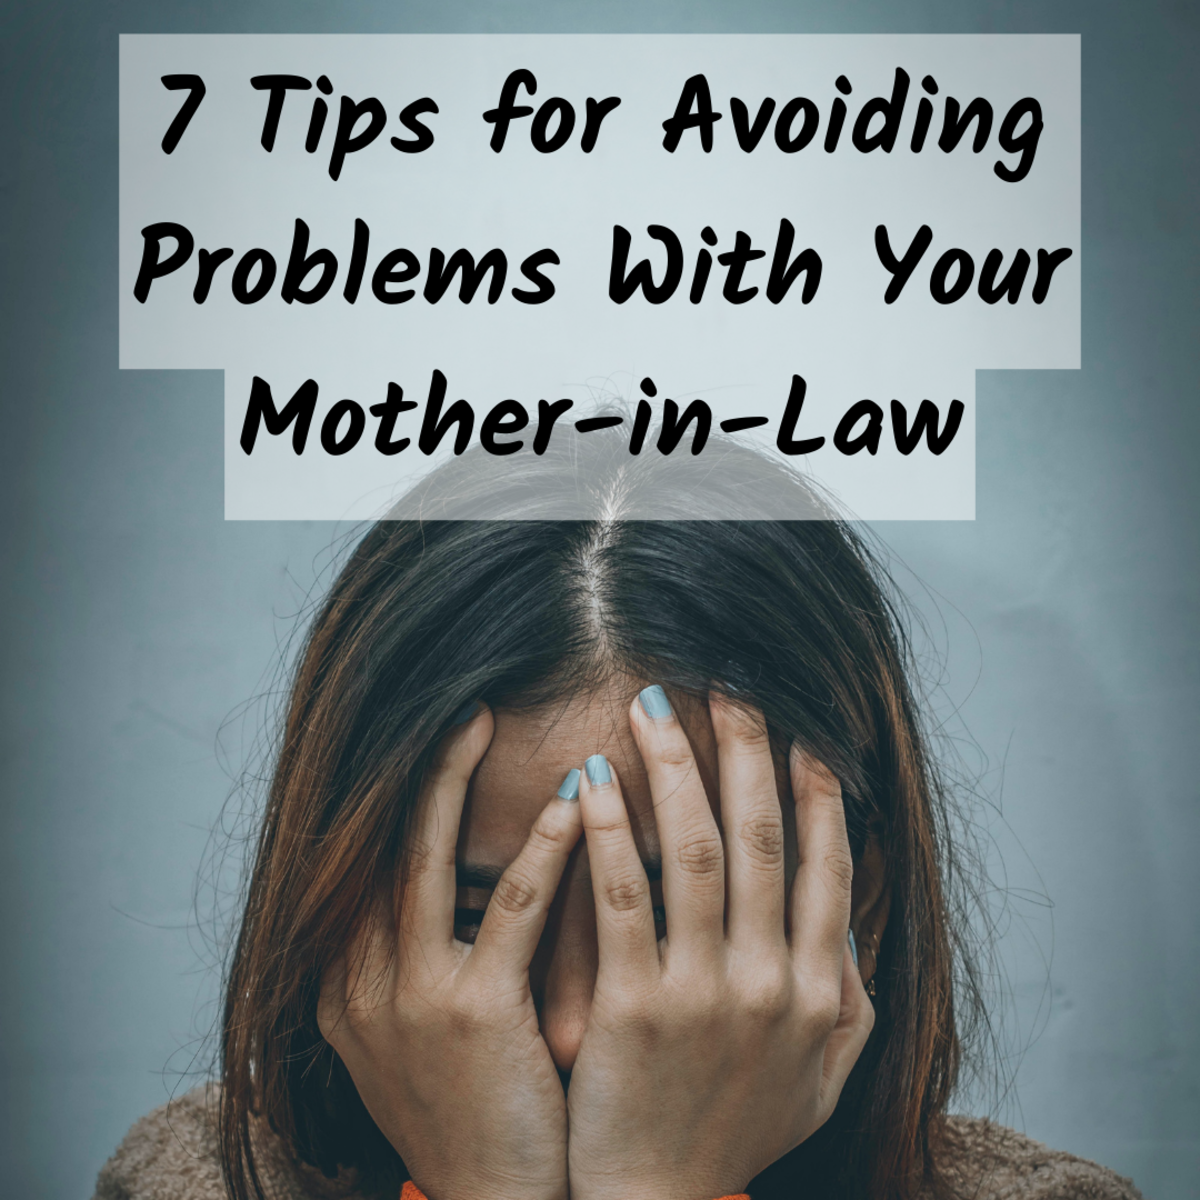 7 Tips for Avoiding Issues With Your Mother-in-Law